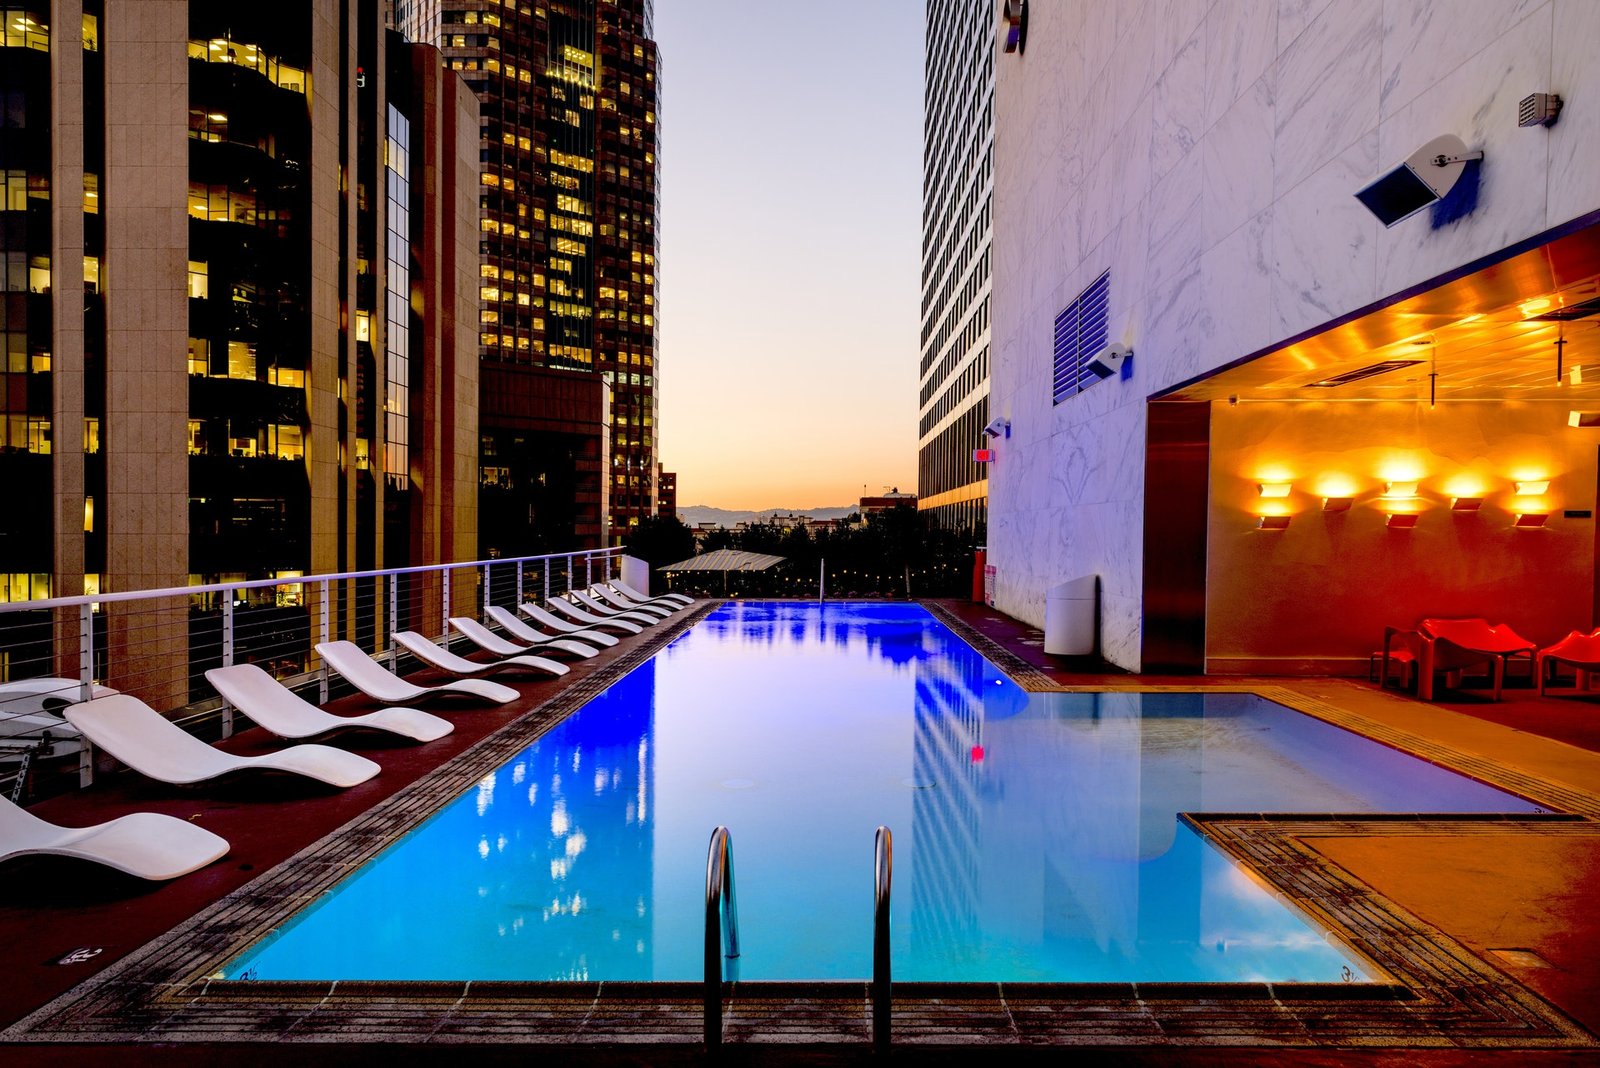 Fantastic San Diego hotels to stay in